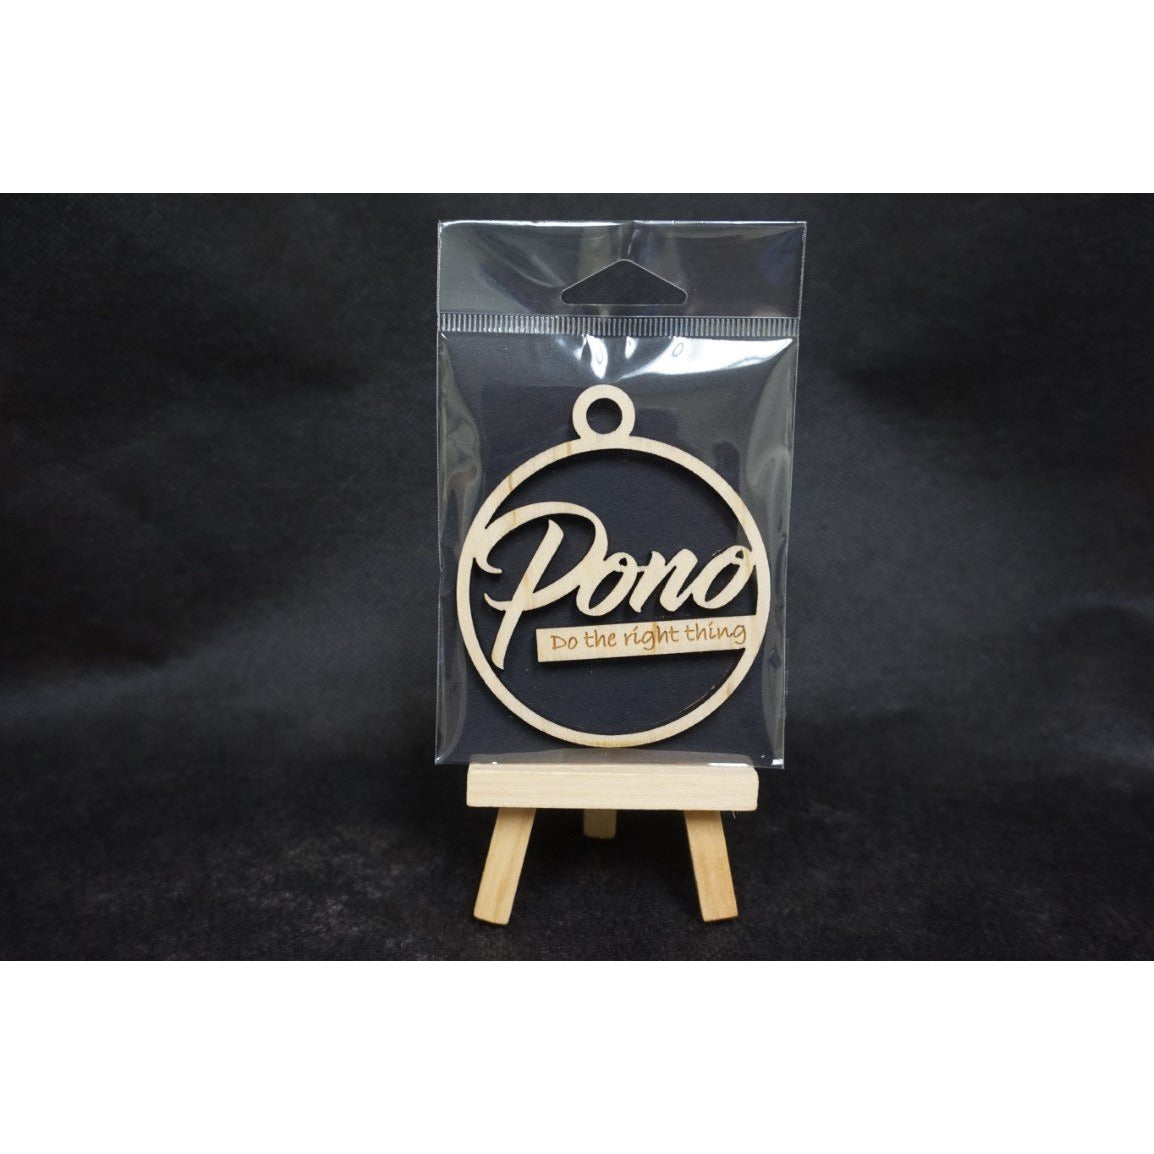 Pono "Do The Right Thing" Ornament